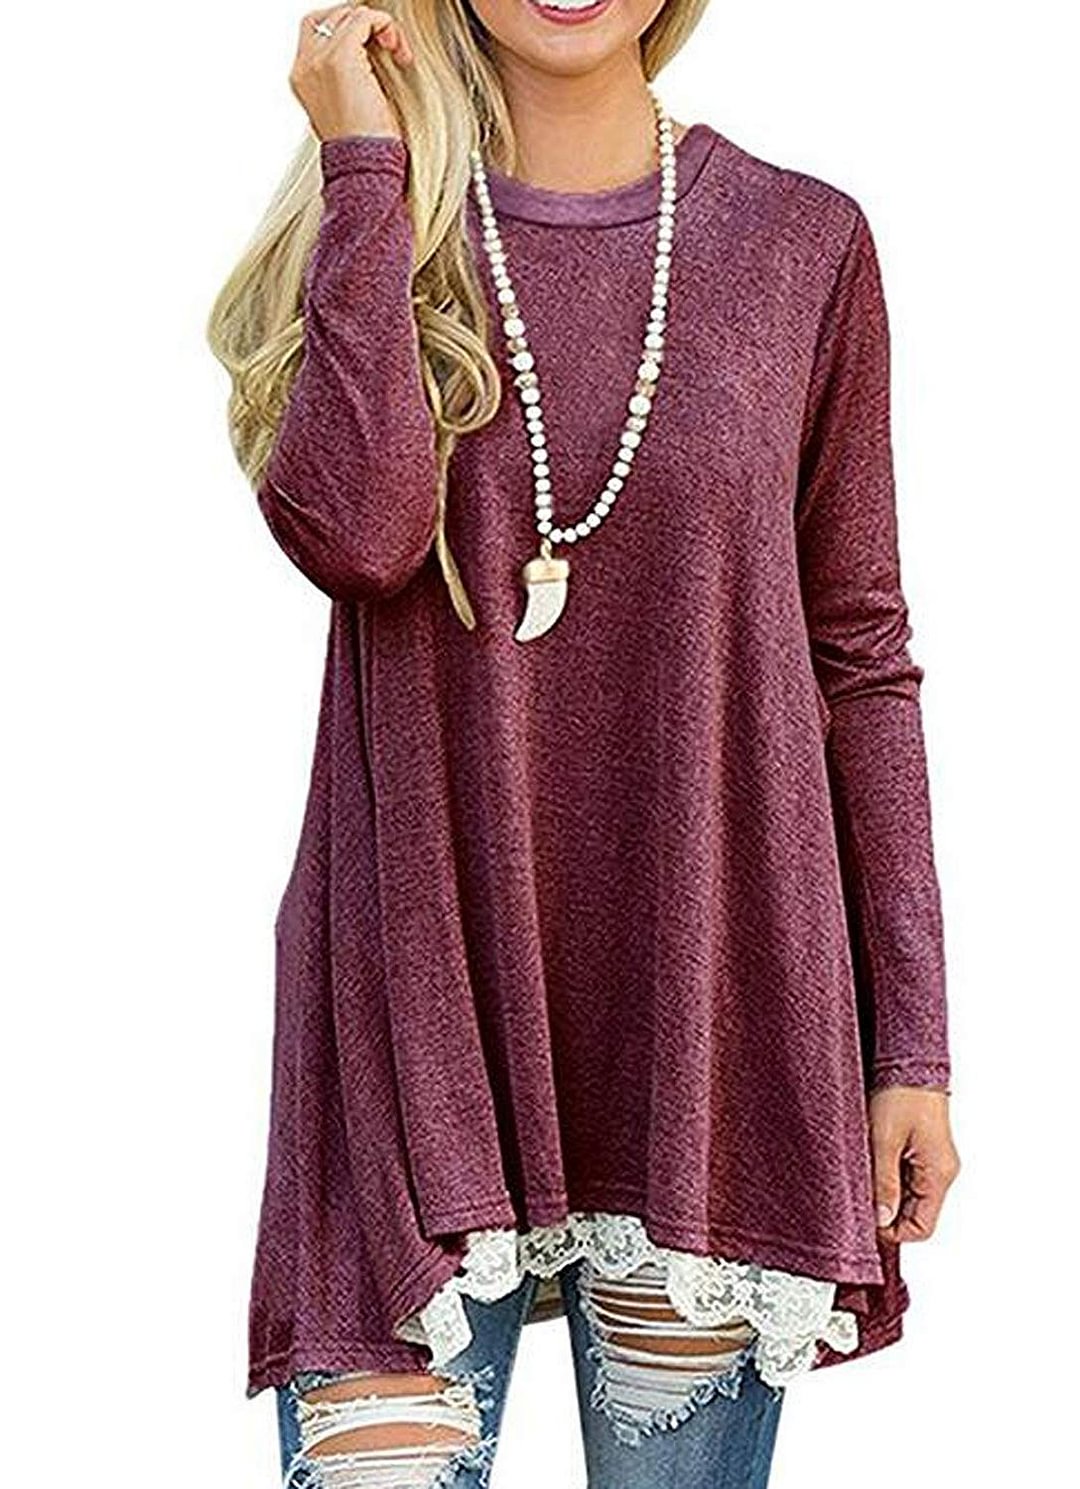 Women's Lace Long Sleeve Tops Casual Round Neck Top Blouses